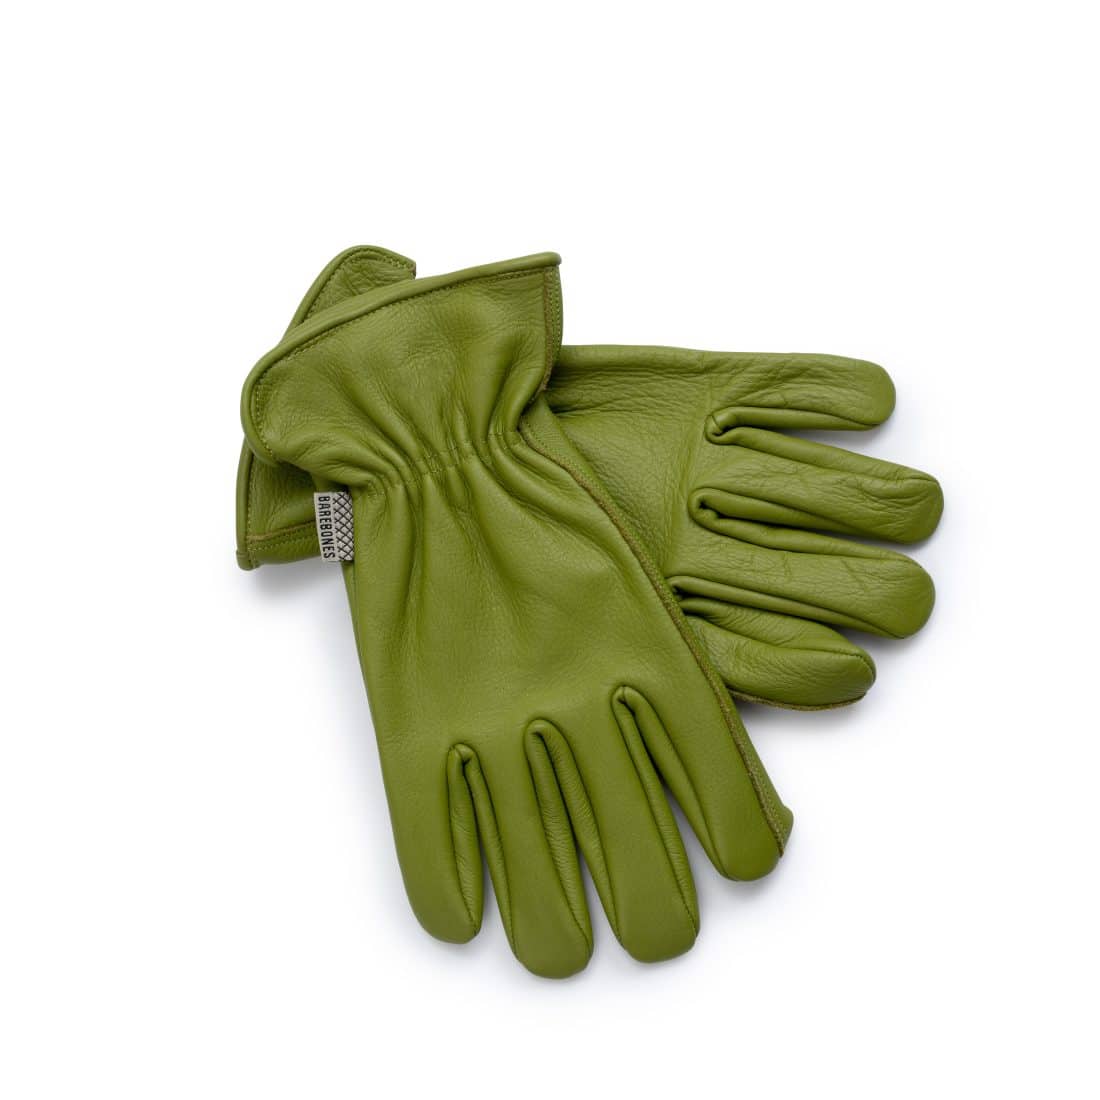 Trp Post Container Data Trp Post Id 17368 Classic Work Glove Olive Trp Post Container